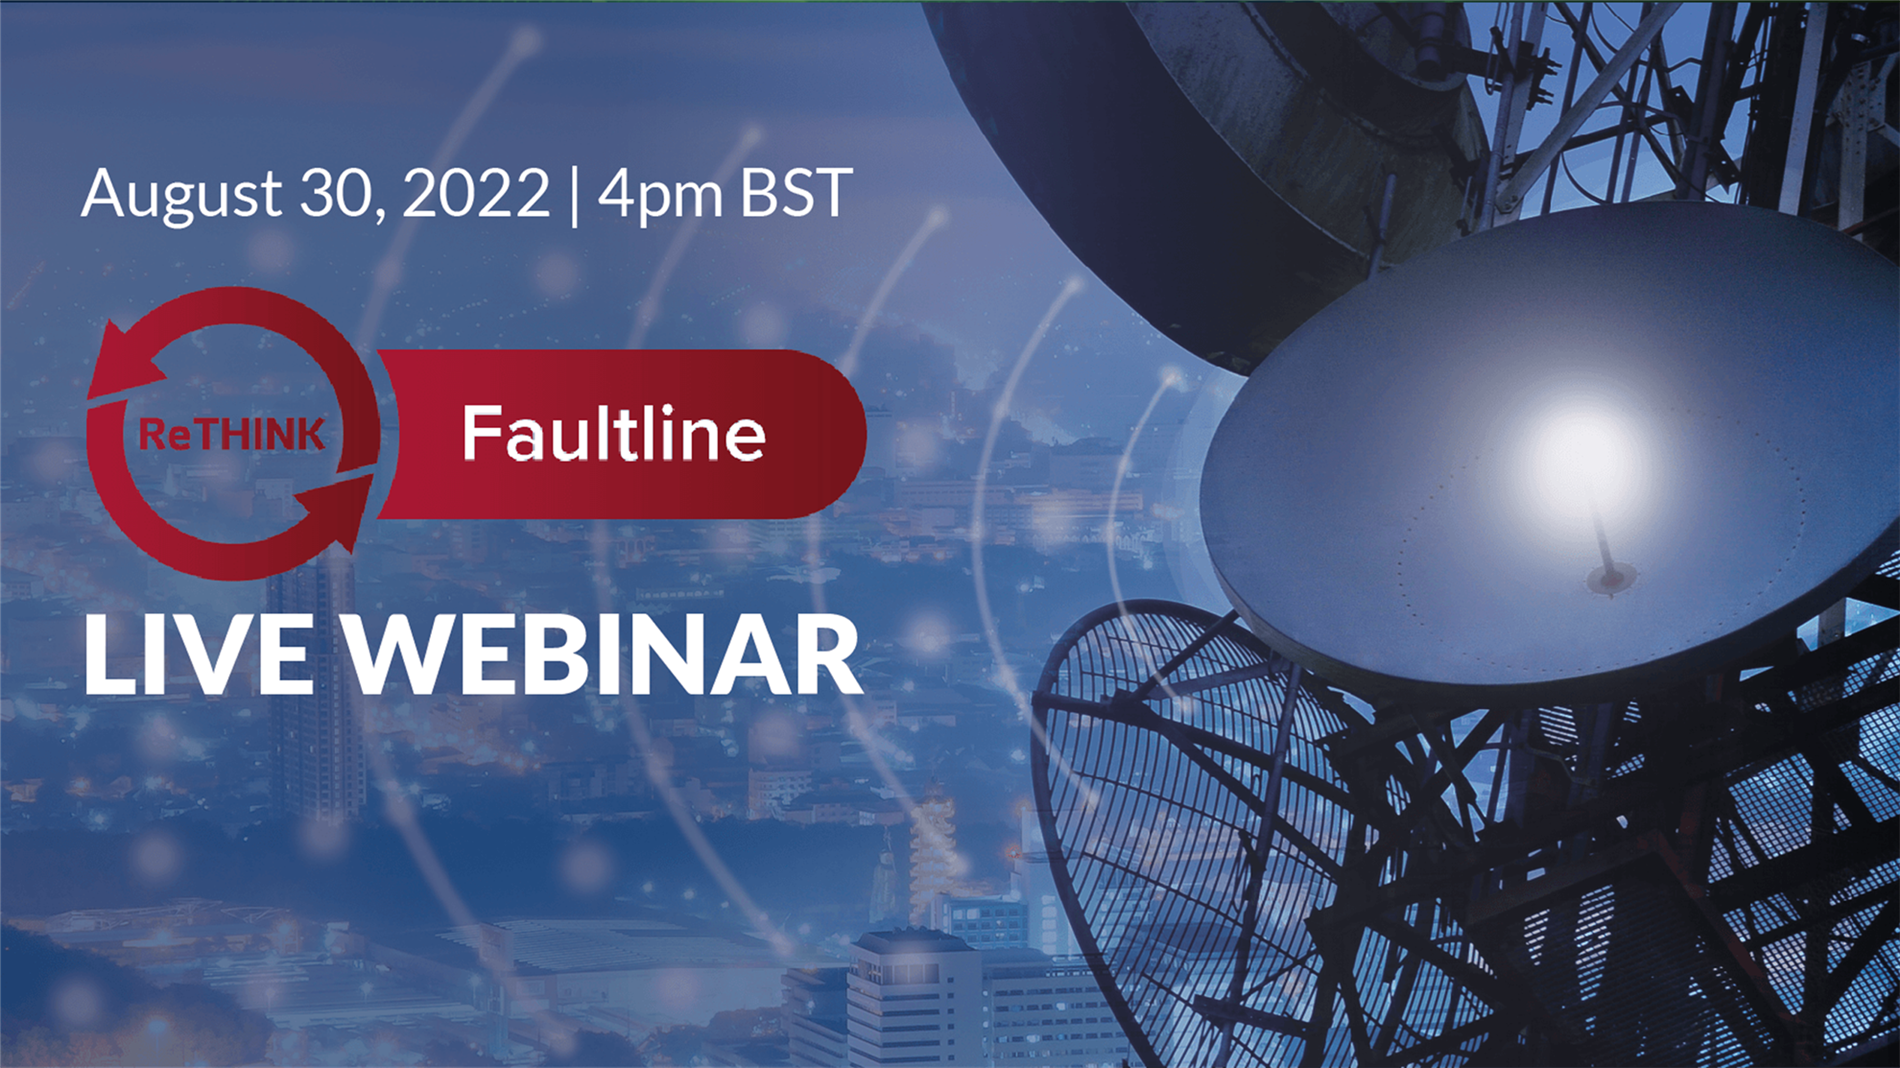 Fincons will be featured in a Faultline webinar on ATSC 3.0 & SBTVD 3.0